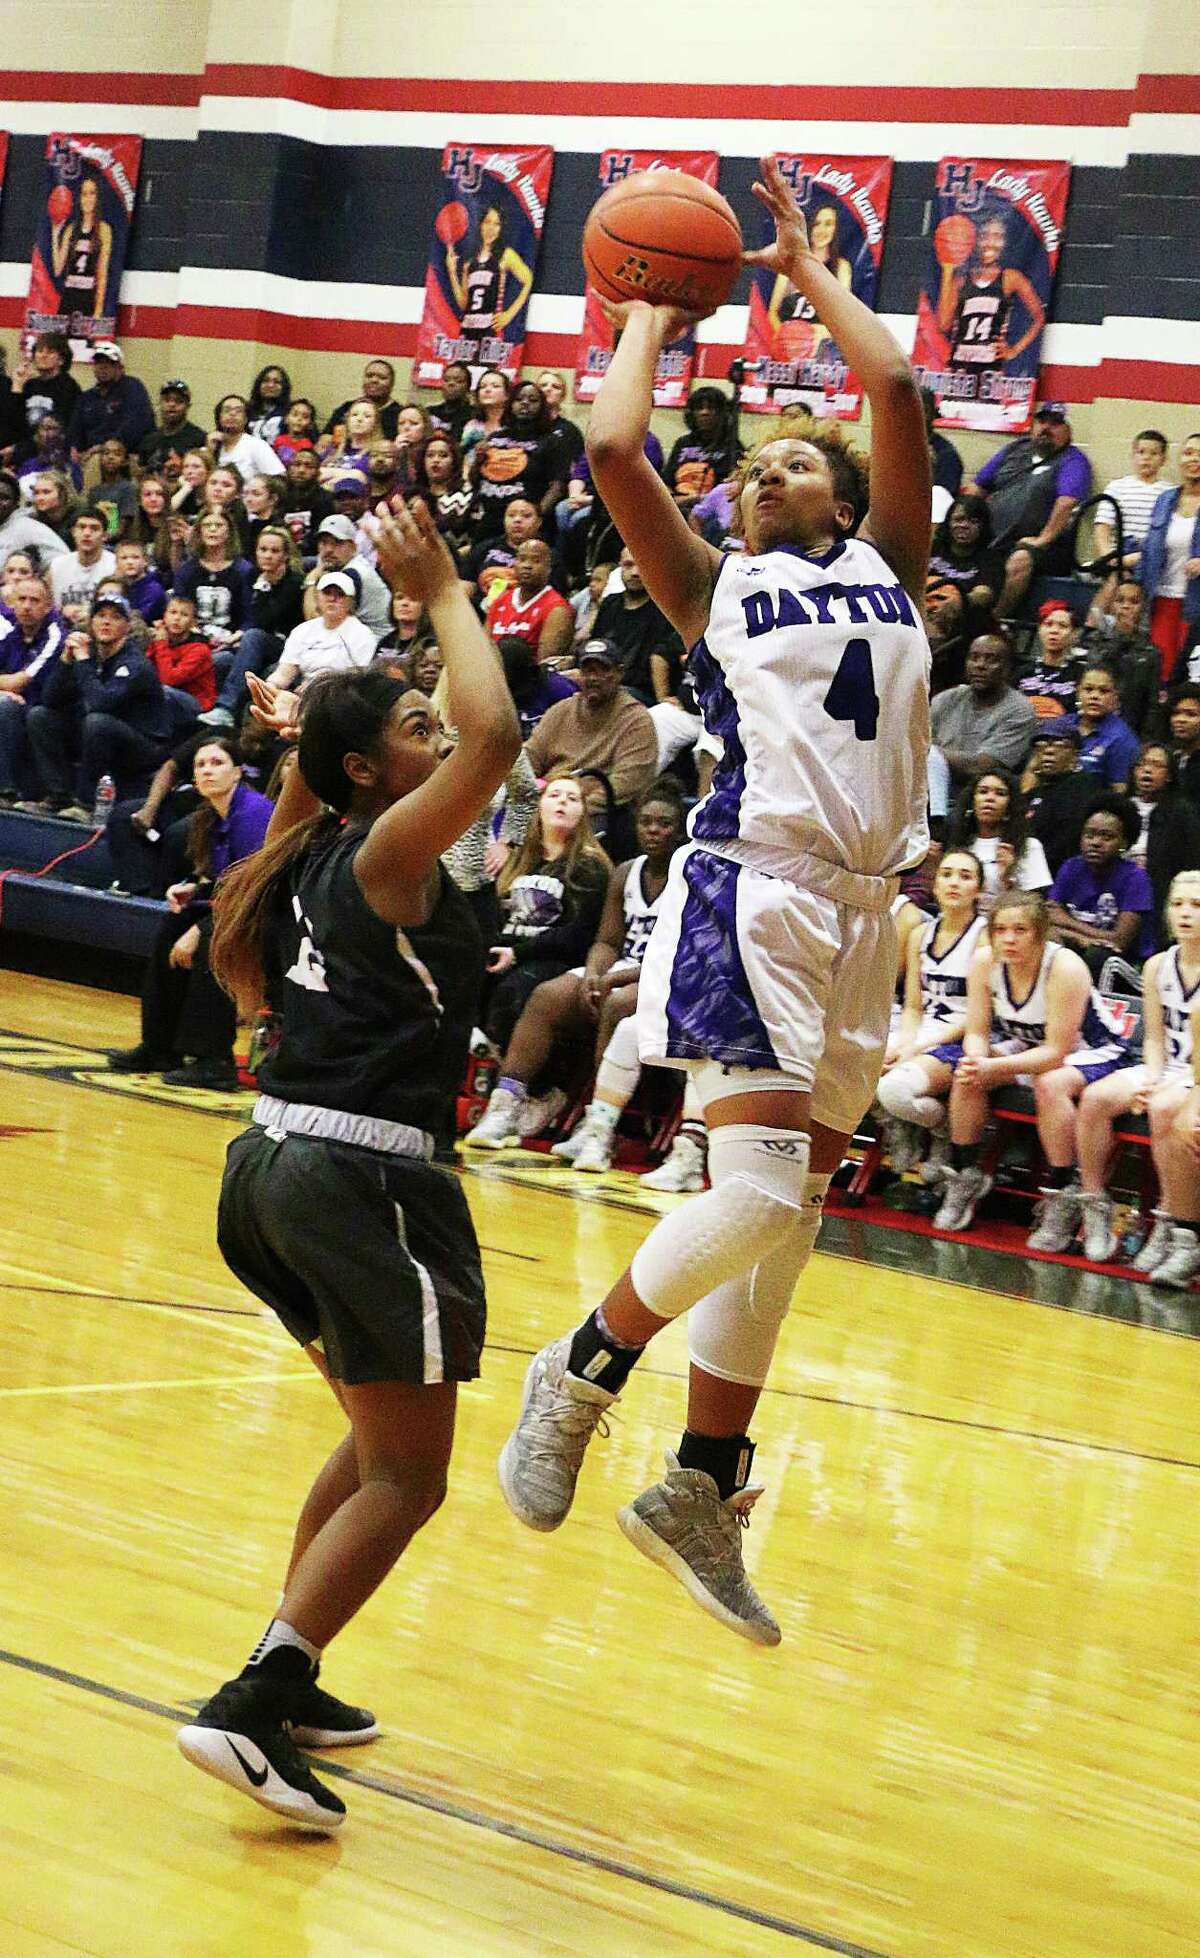 DaytonÂ?’s Tayelin Grays takes the ball to the hoop in the first-round playoff game against Beaumont Central on Monday night. Grays contributed 40 points in the Lady Broncos upset loss, 78-74.